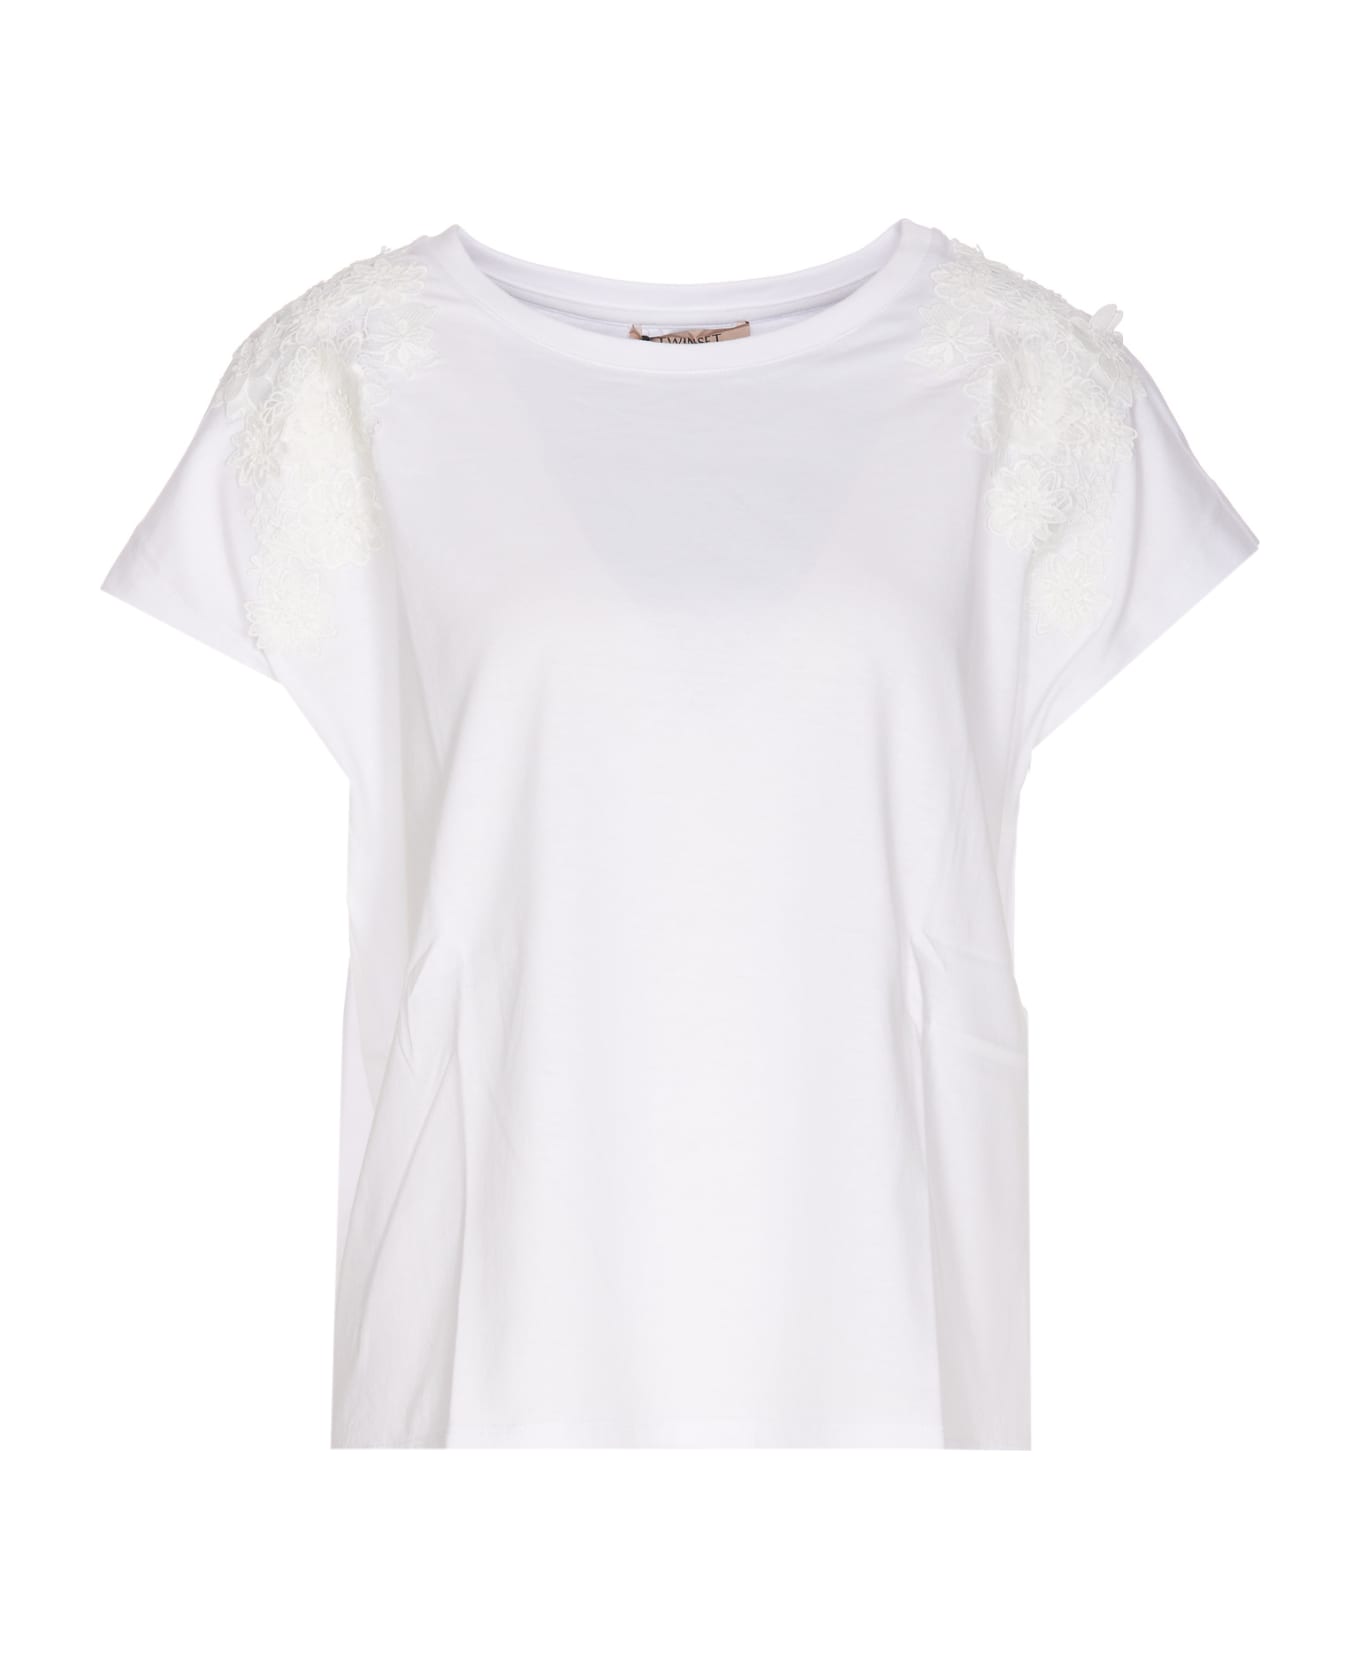 TwinSet T-shirt With Lace Details - White Tシャツ